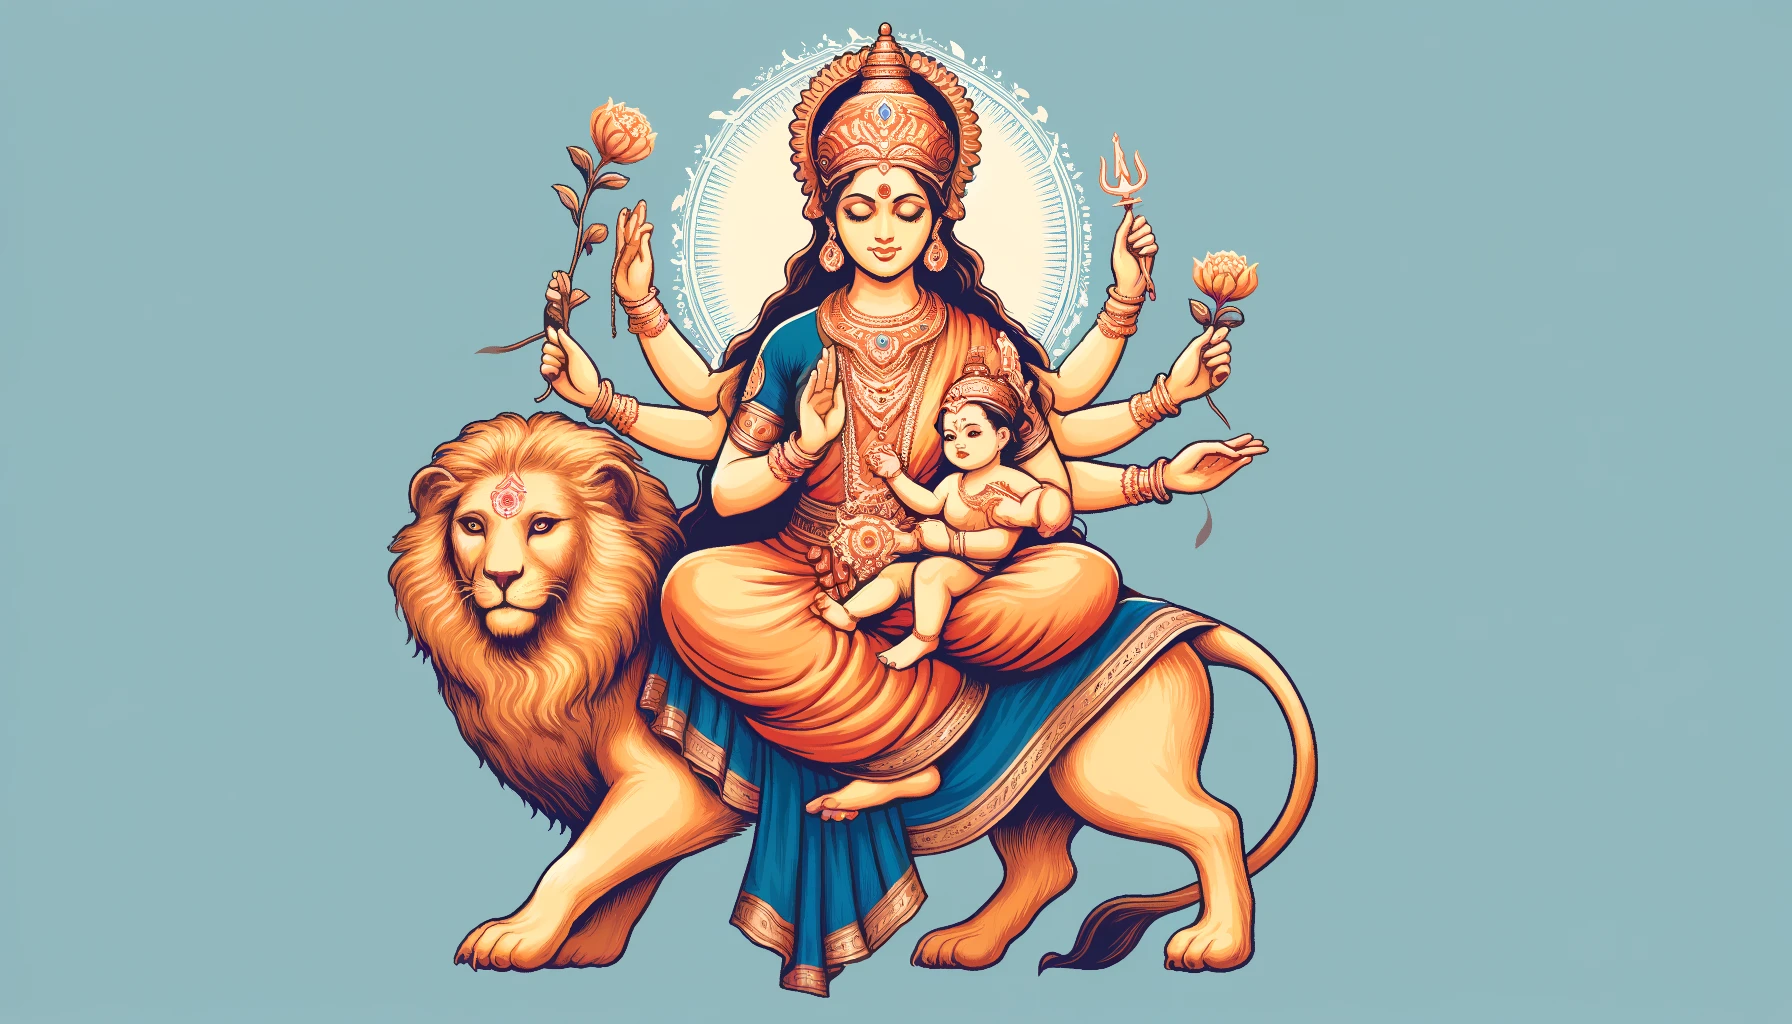 A nurturing and powerful illustration of Goddess Skandamata, the fifth form of Goddess Durga worshipped on the fifth day of Navratri. The image should